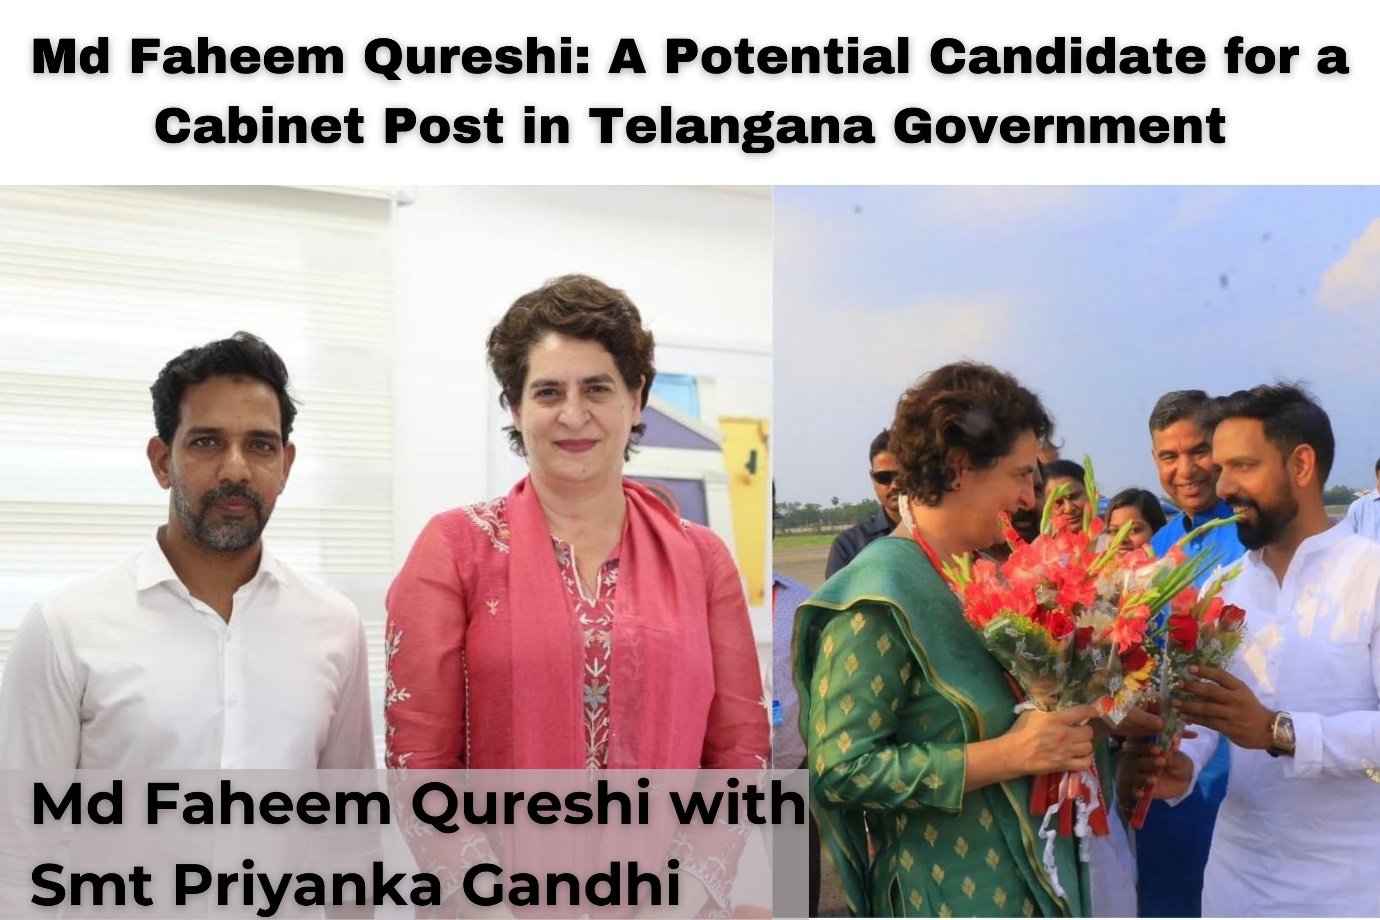 Visionary Politician Nominated as a Key Contender for Telangana Cabinet Position – Md Faheem Qureshi